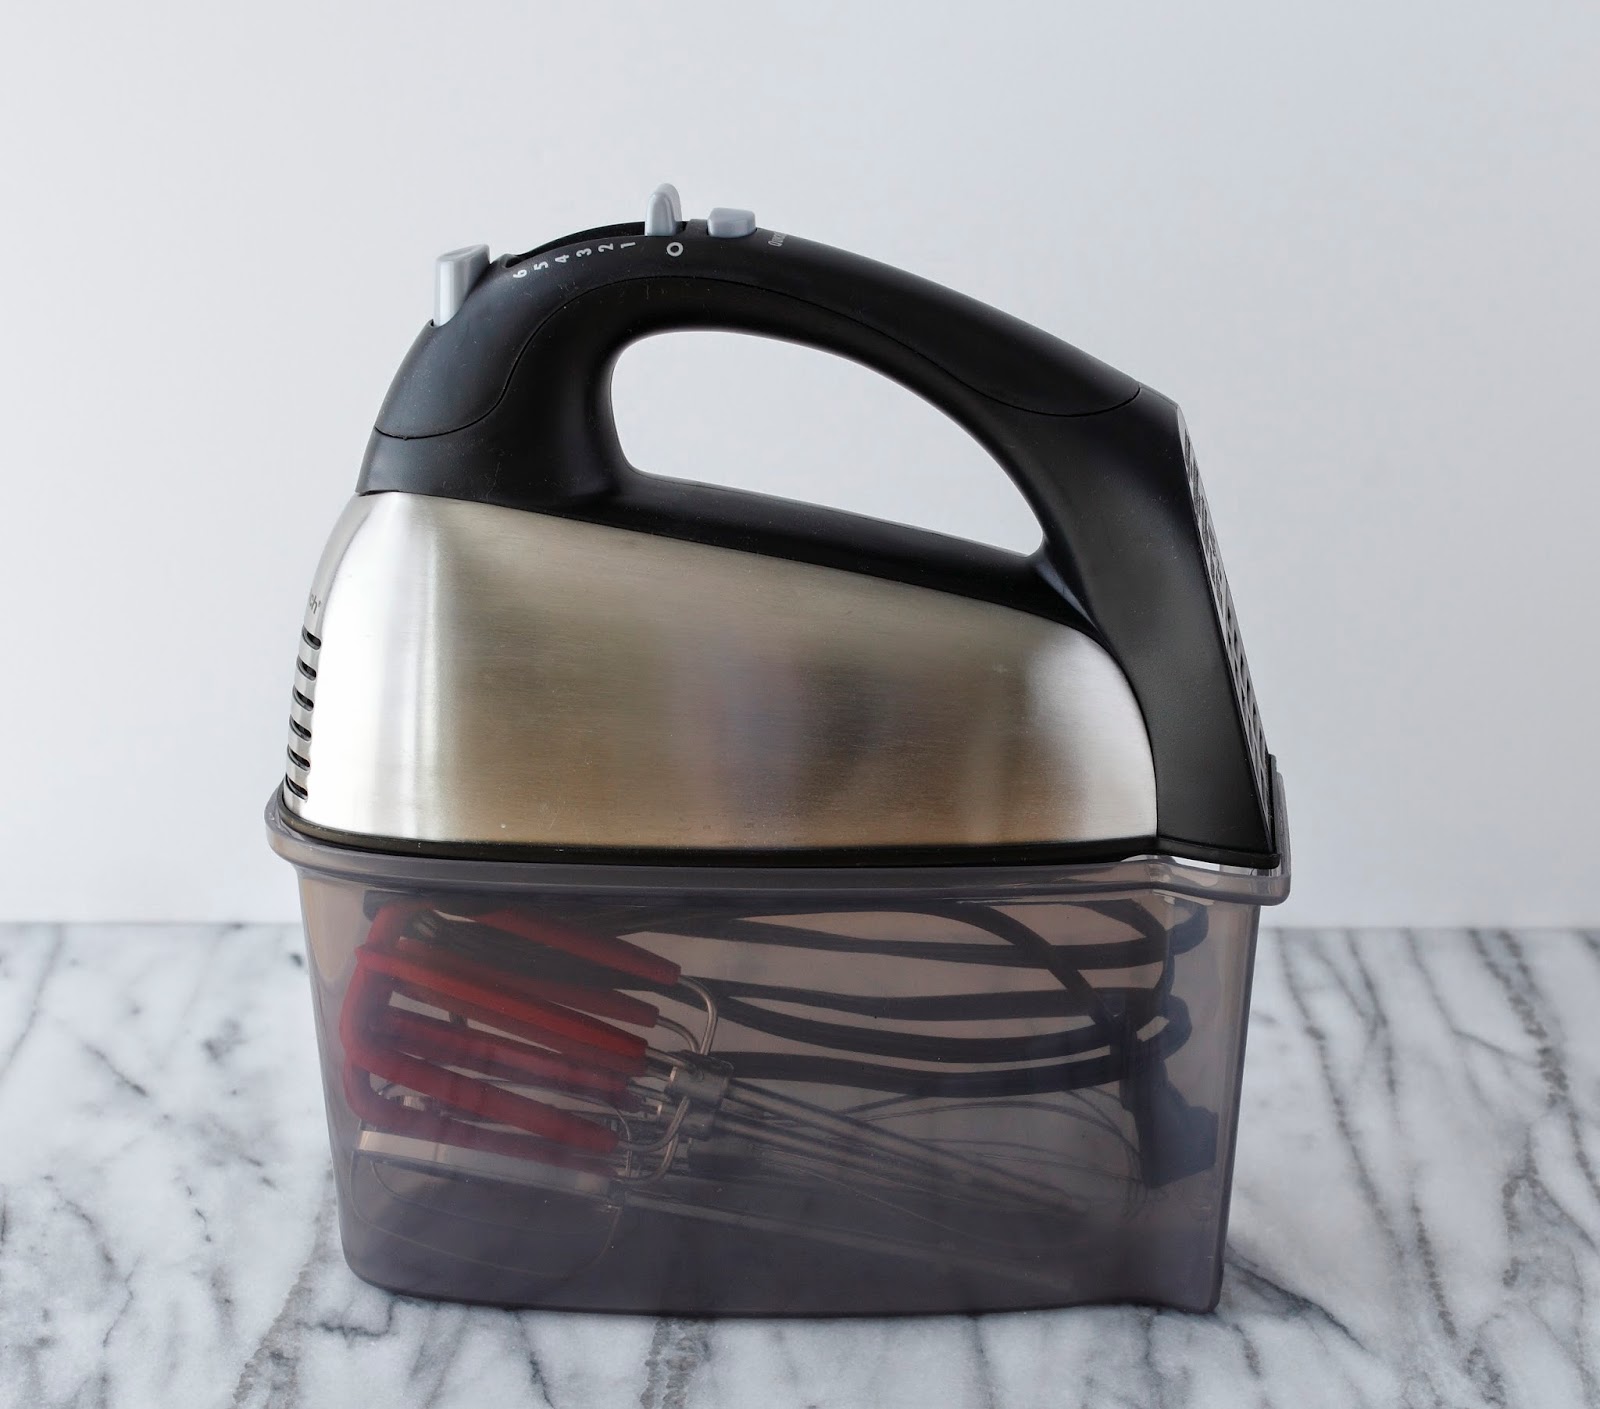 Learning to Eat Allergy-Free: Hamilton Beach Electric Mixer Review and